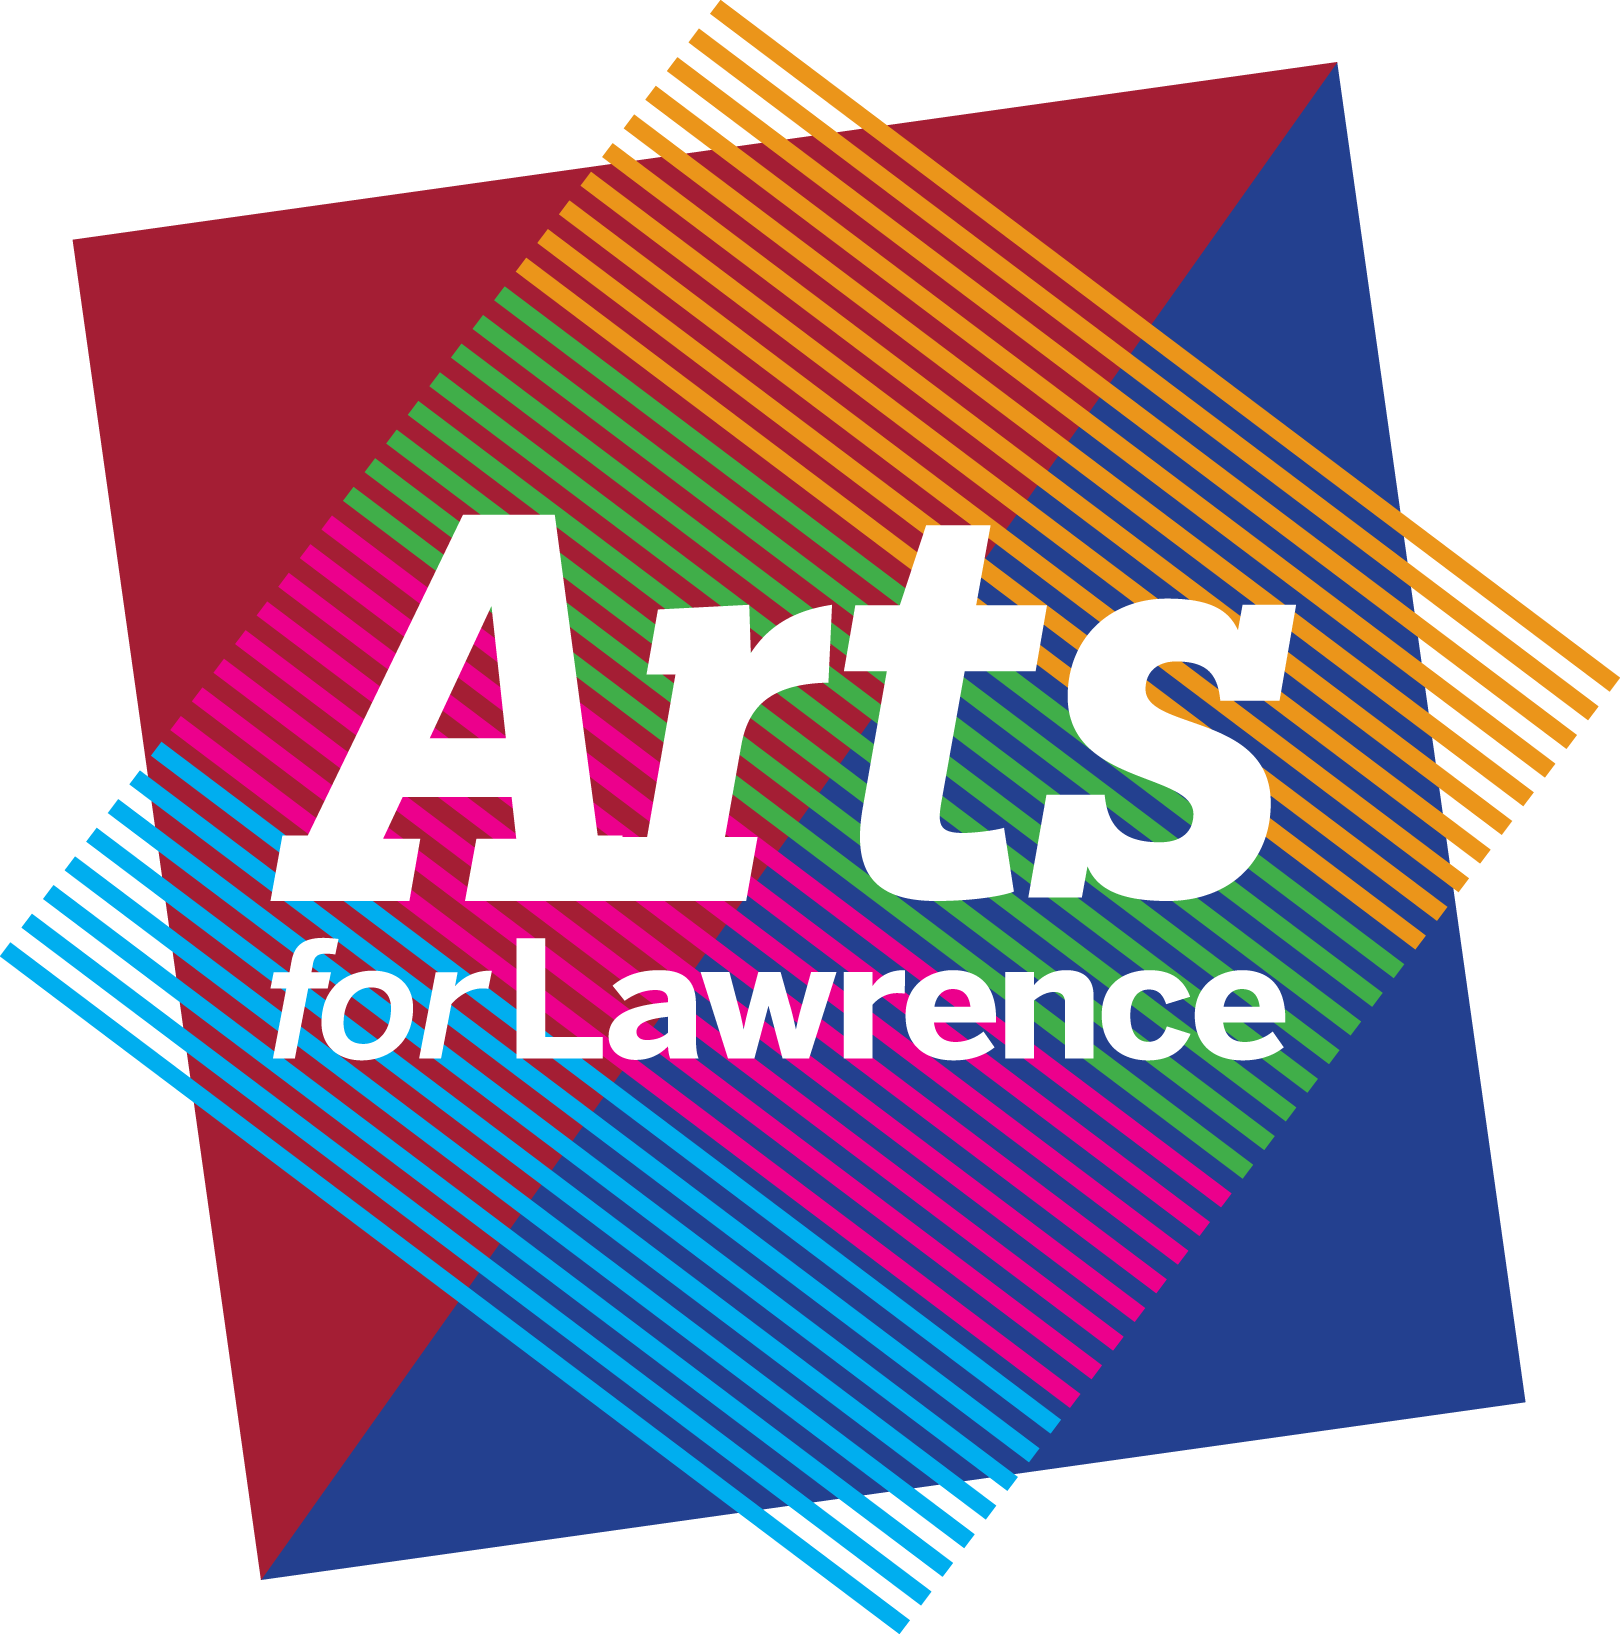 We Need You For The First Professional Production By - Arts For Lawrence (1620x1634)